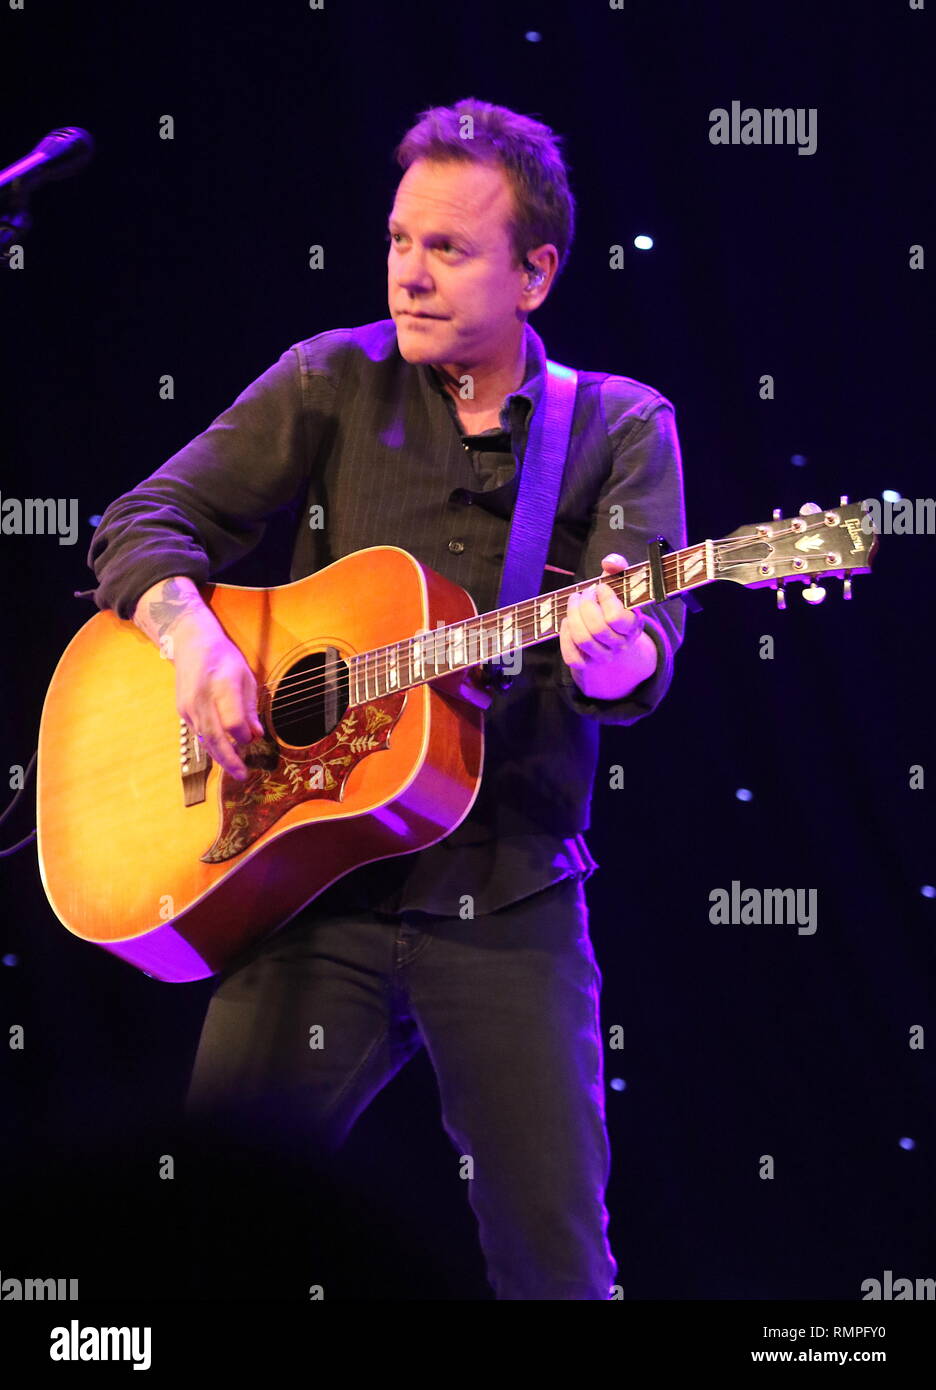 Actor, producer, director, and singer-songwriter Kiefer Sutherland is shown performing on stage during a 'live' concert appearance. Stock Photo